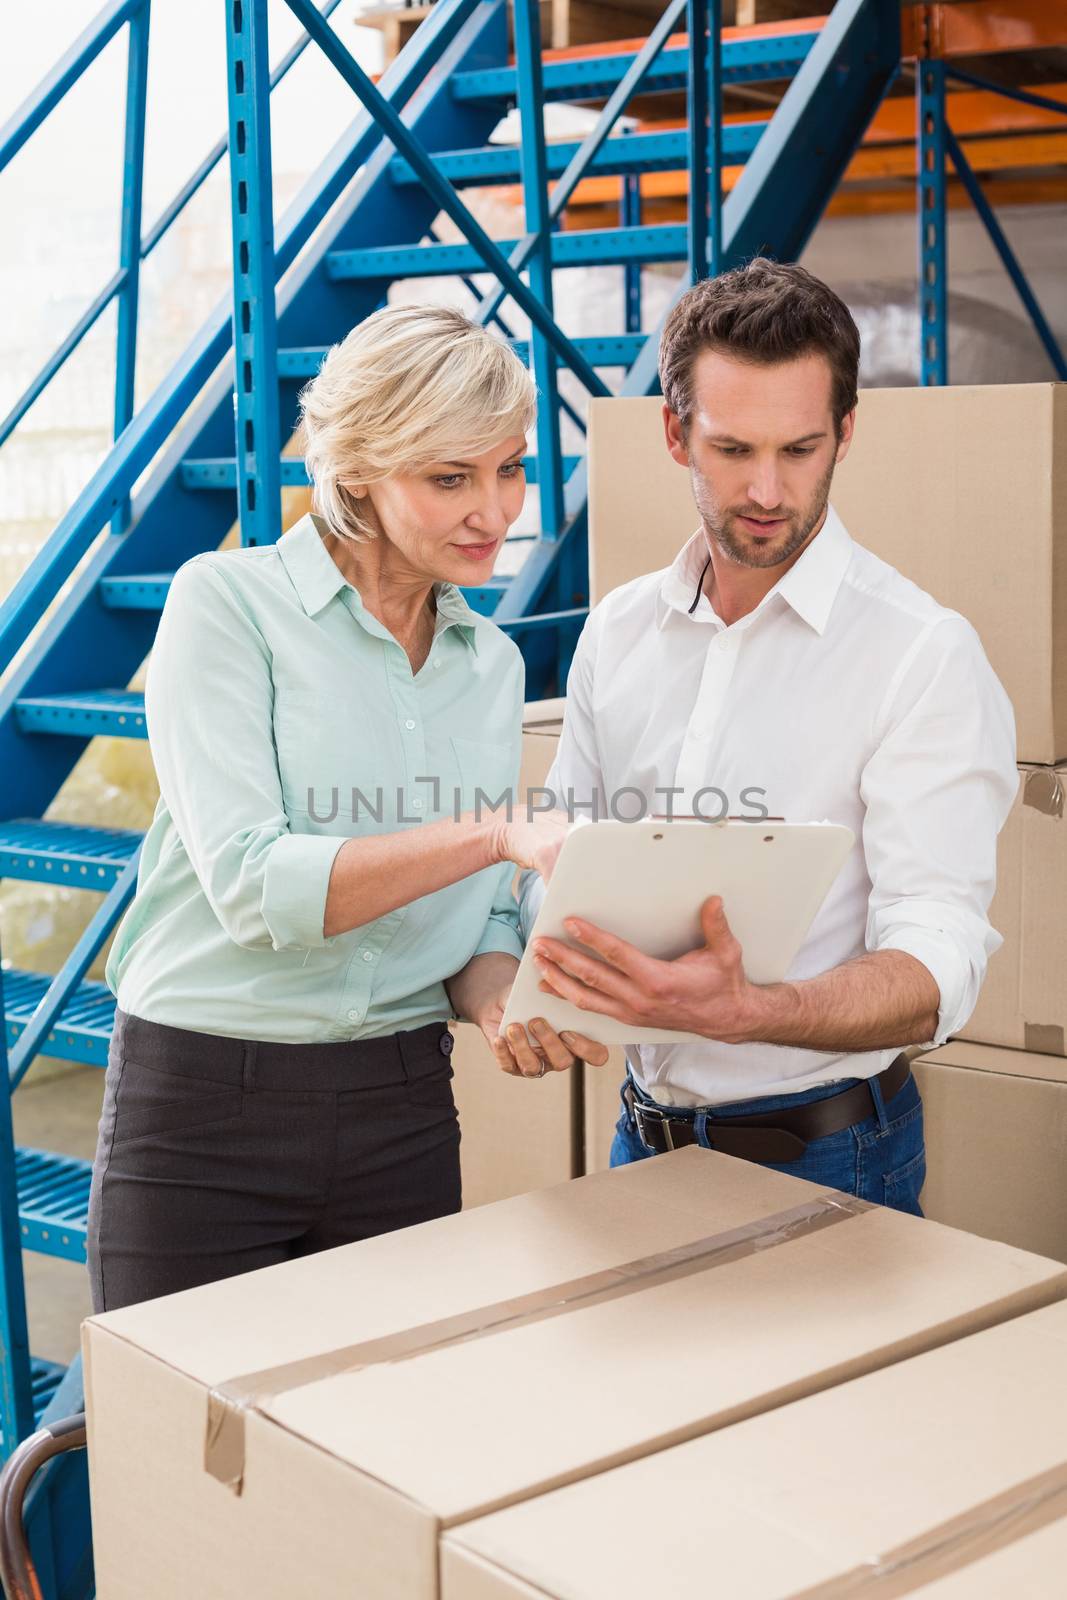 Focused warehouse managers with clipboard in a large warehouse